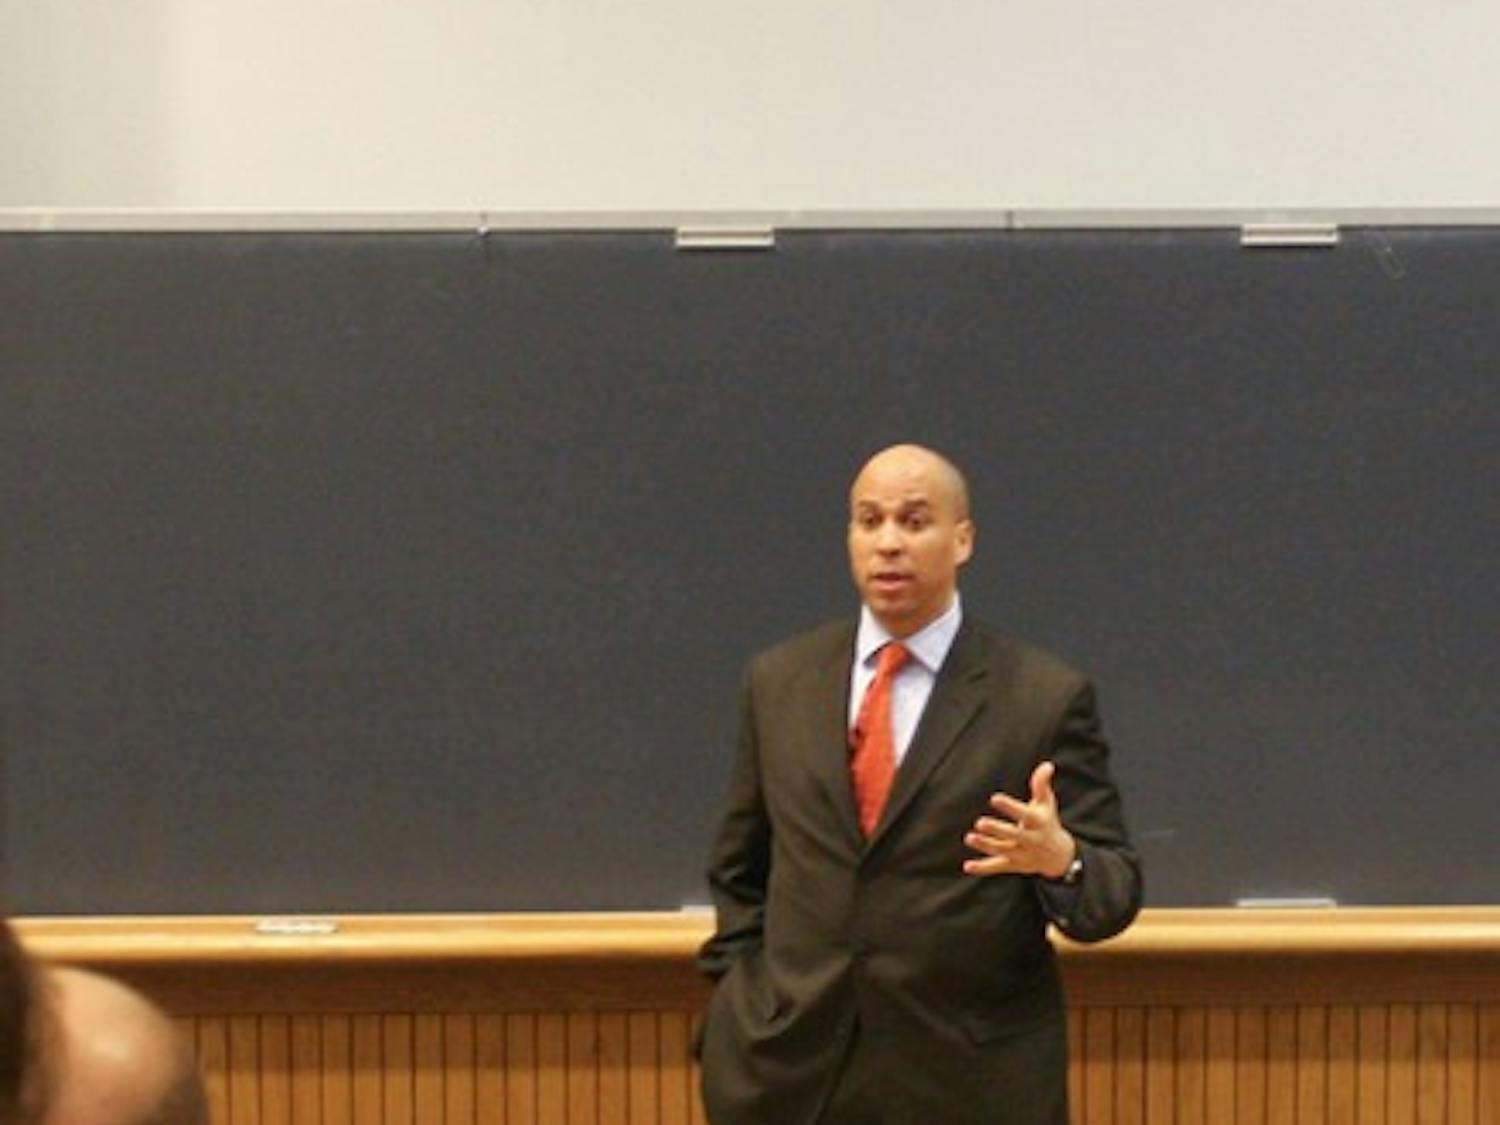 Newark Mayor Cory Booker discussed social activism in his Monday lecture and called for Americans to take a greater interest in public service